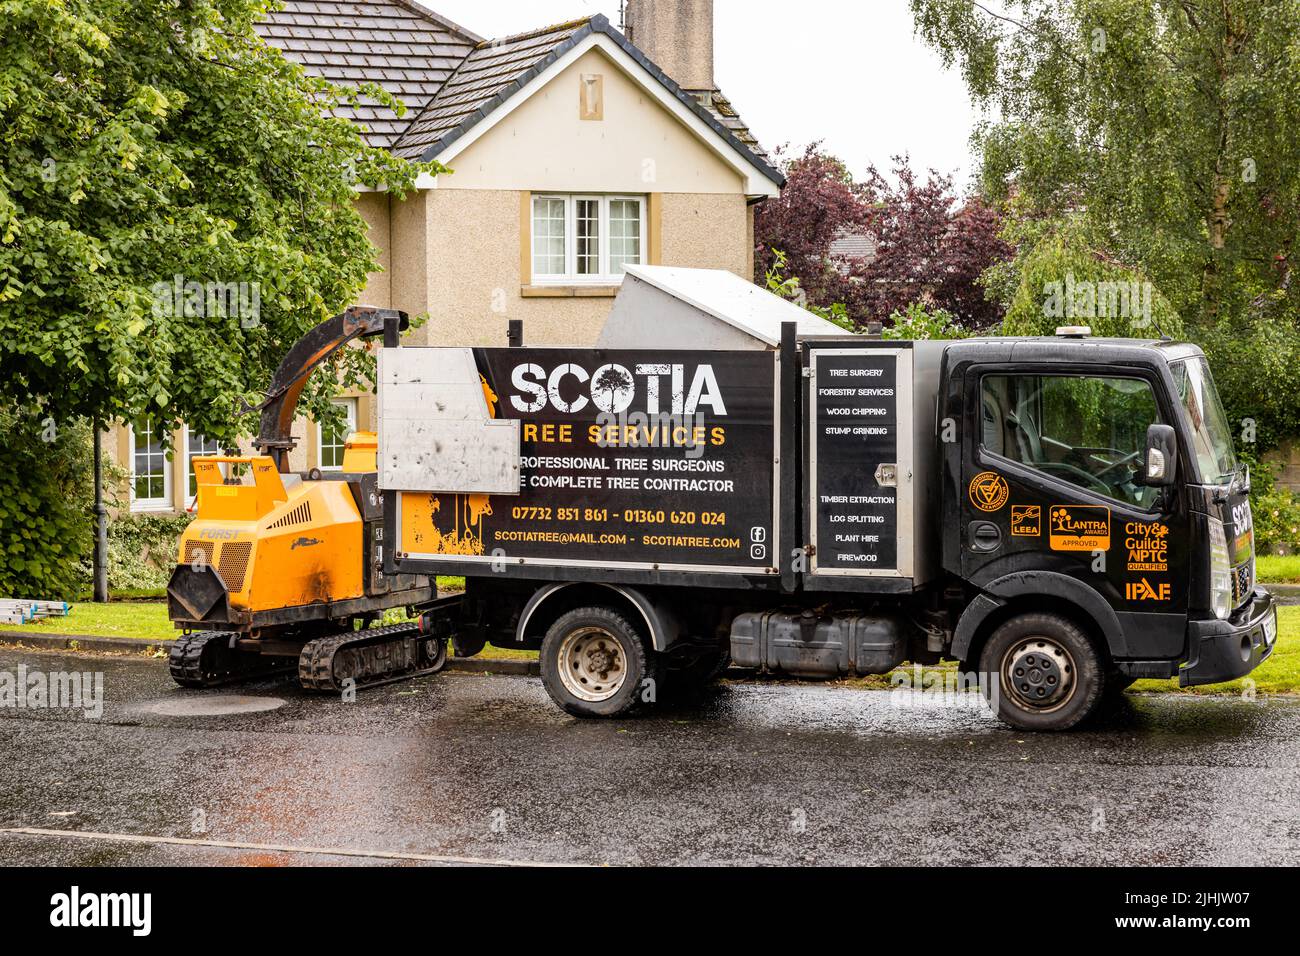 Tree surgeon. Scotia professional tree services truck with hopper facility, with tracked chipping machine for shredding trees and shrubs in suburbs Stock Photo